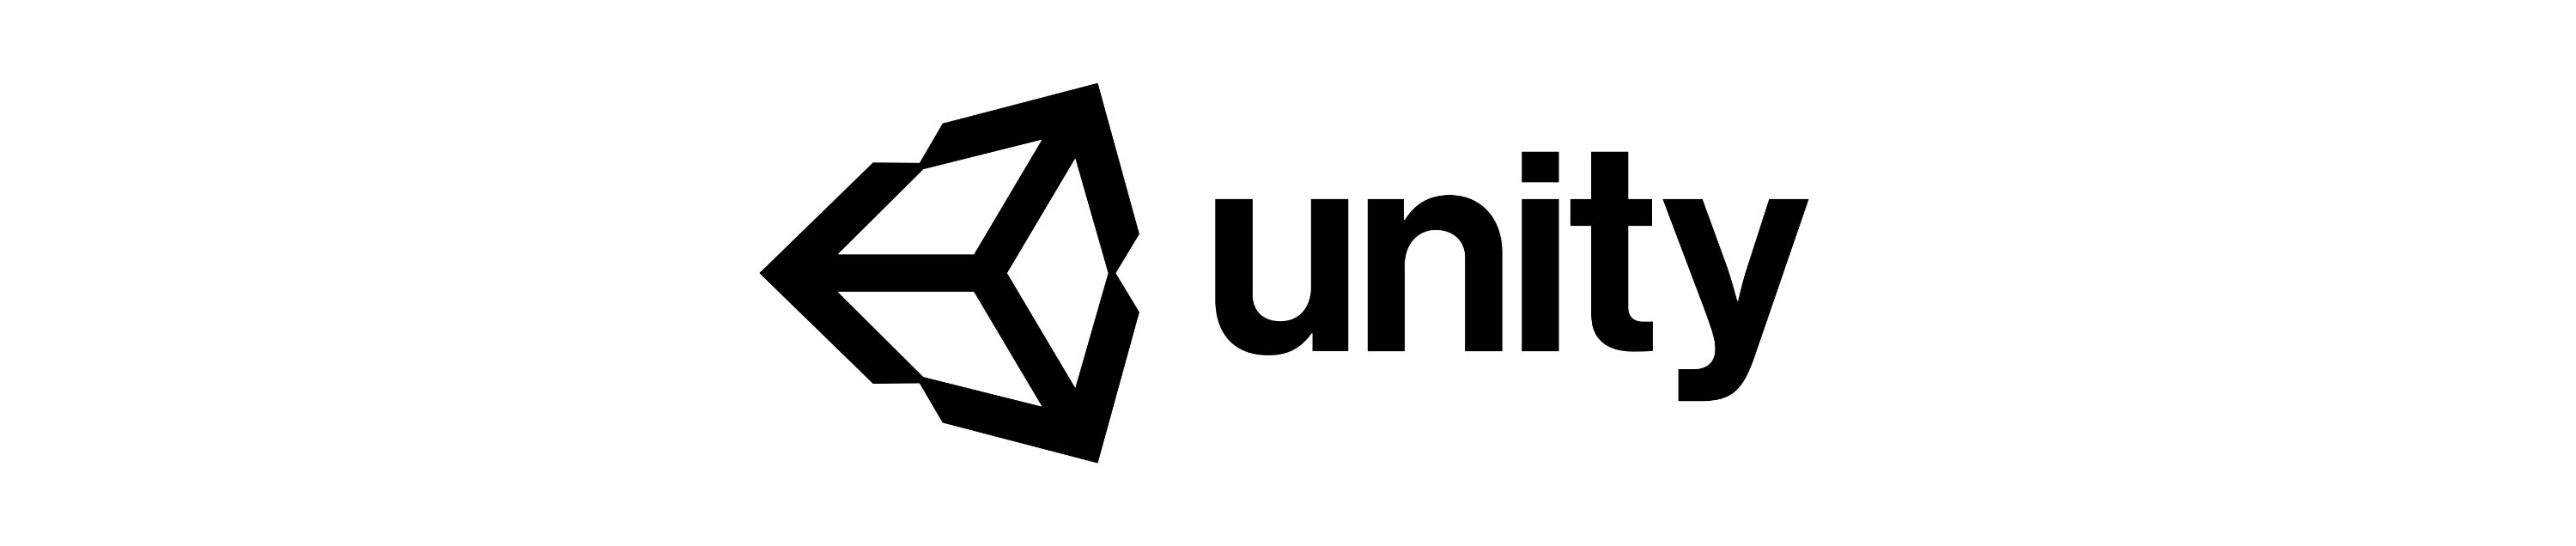 unity-wide-whiteback.png